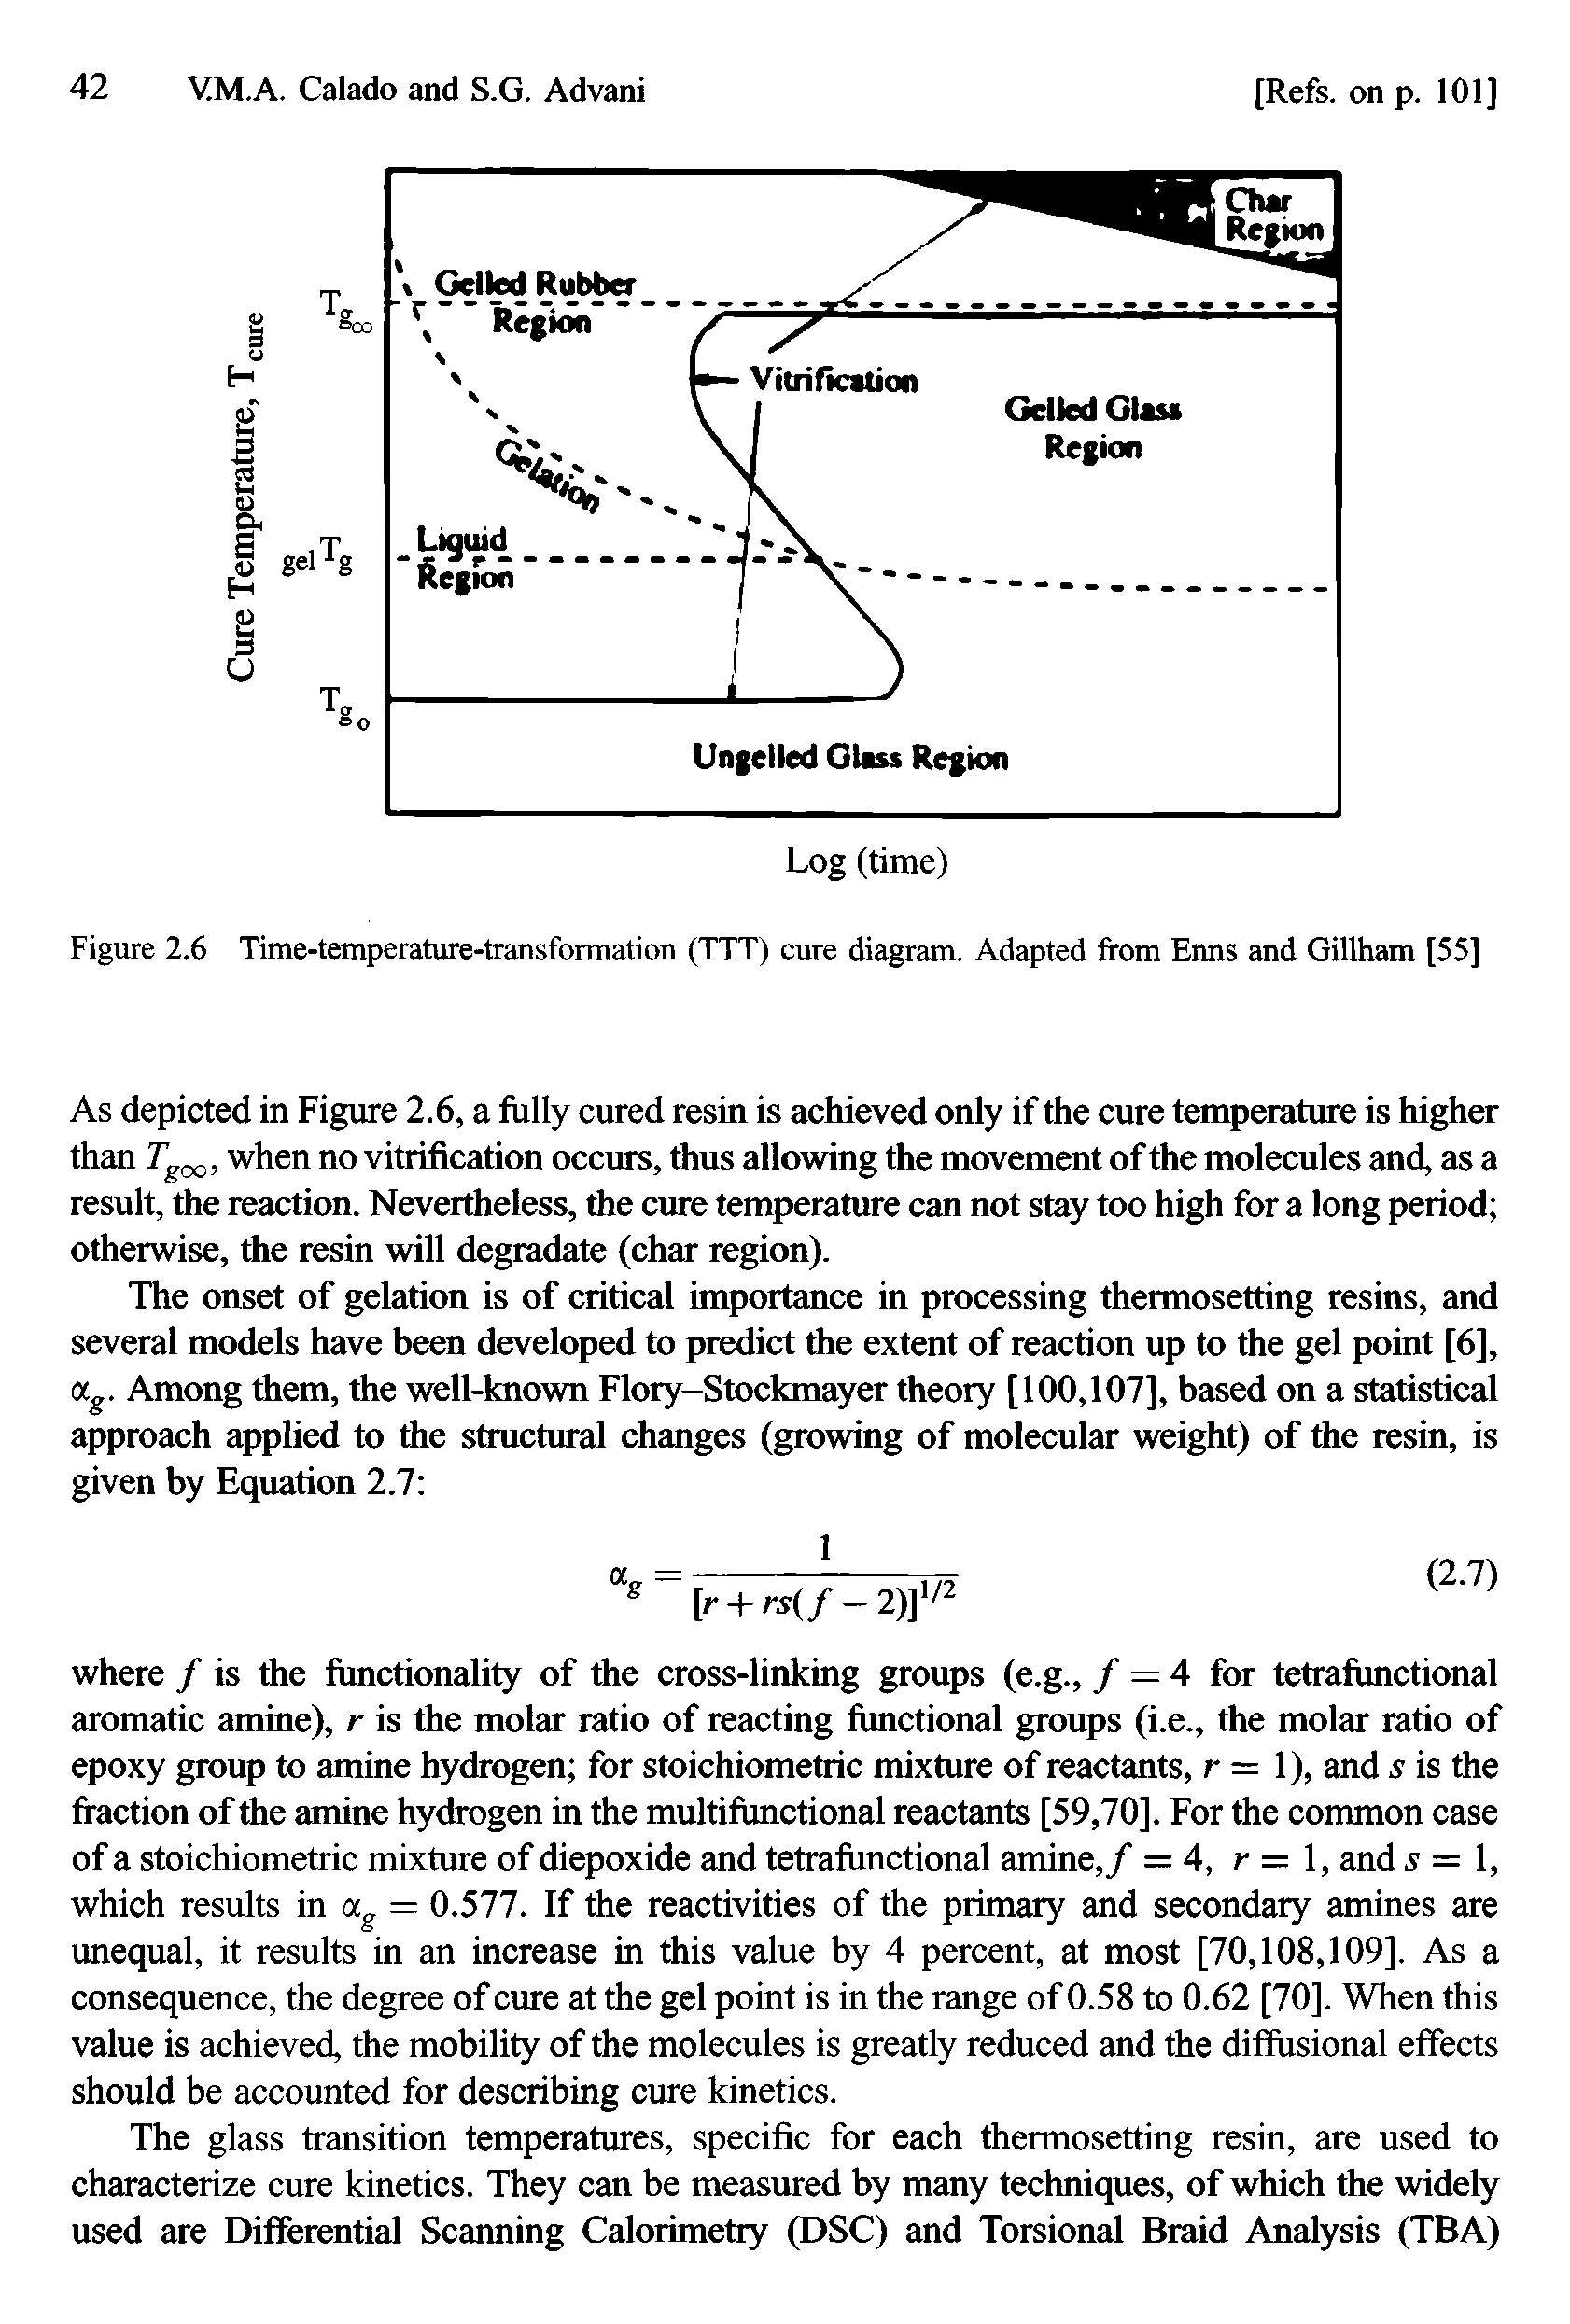 Figure 2.6 Time-temperature-transformation (TTT) cure diagram. Adapted from Enns and Gillham [55]...